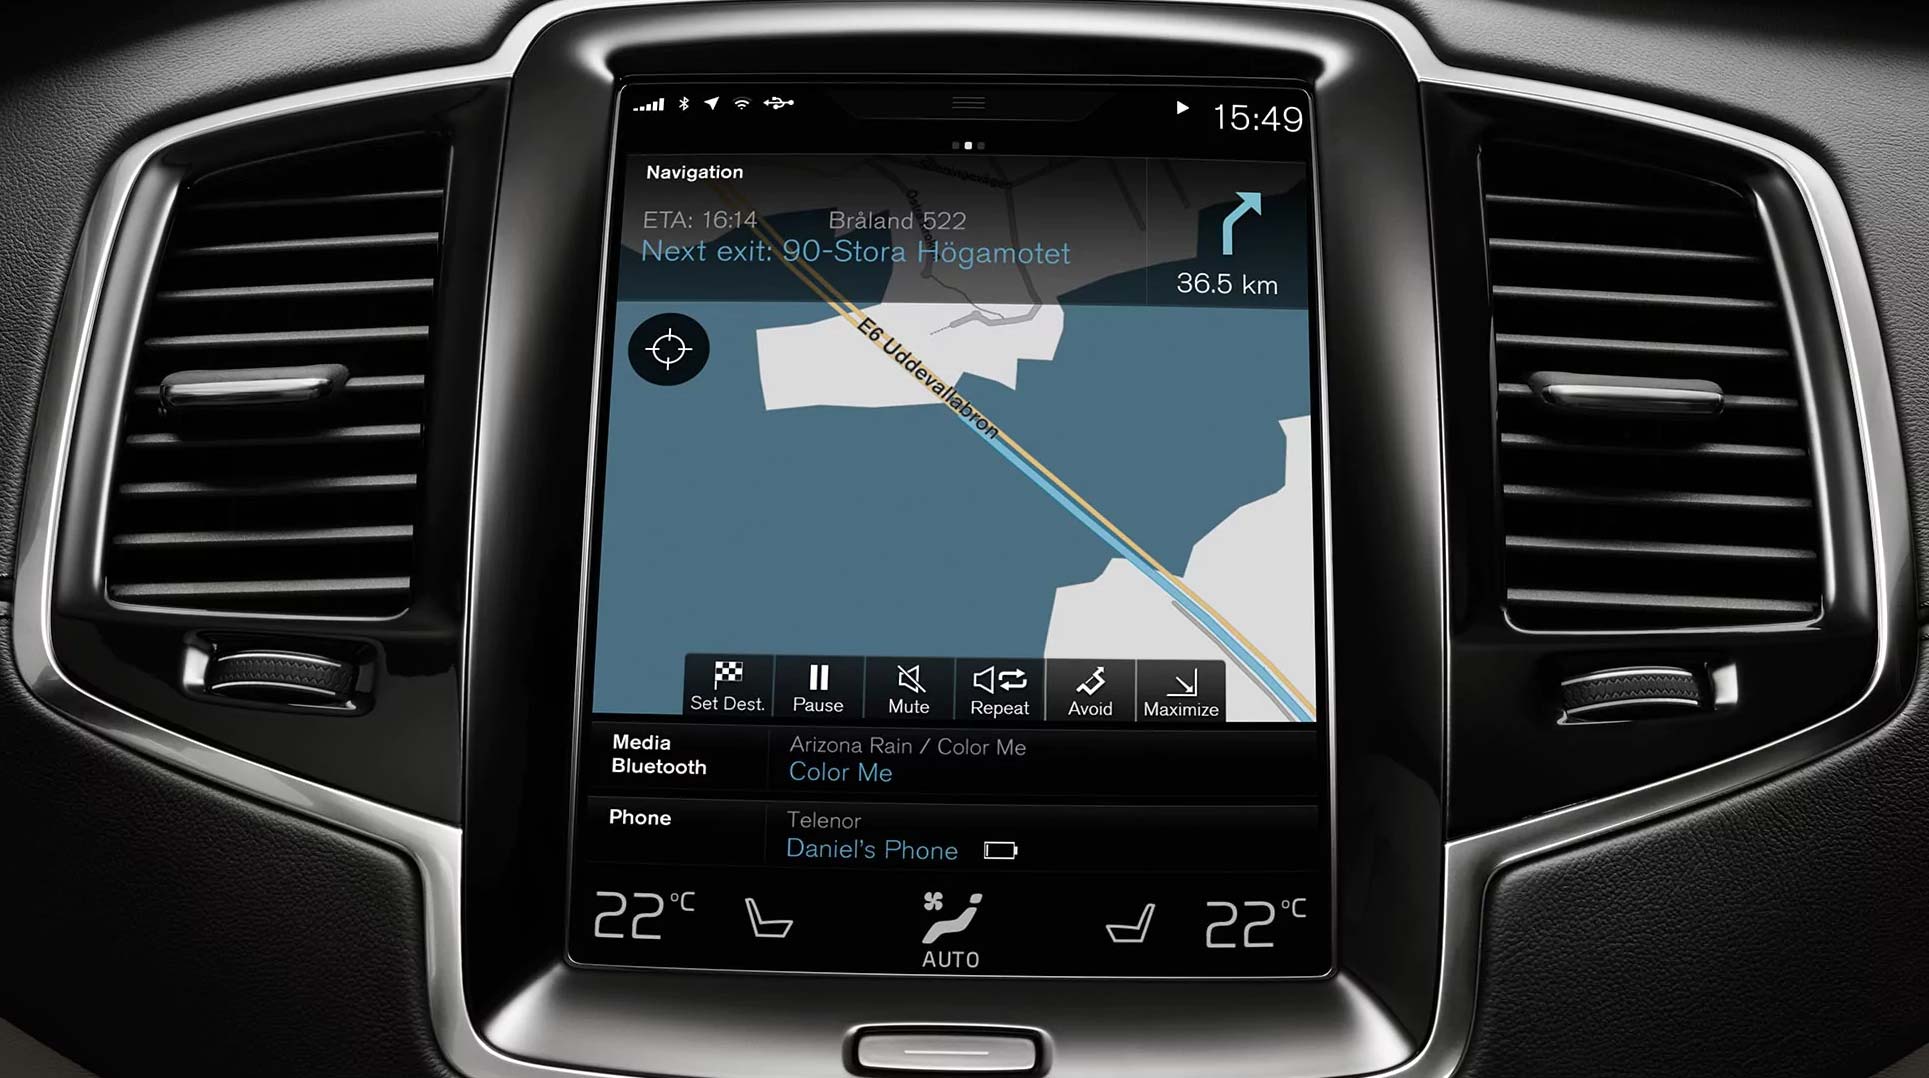 The dashboard infotainment system of the Volvo XC90. Credit: Volvo